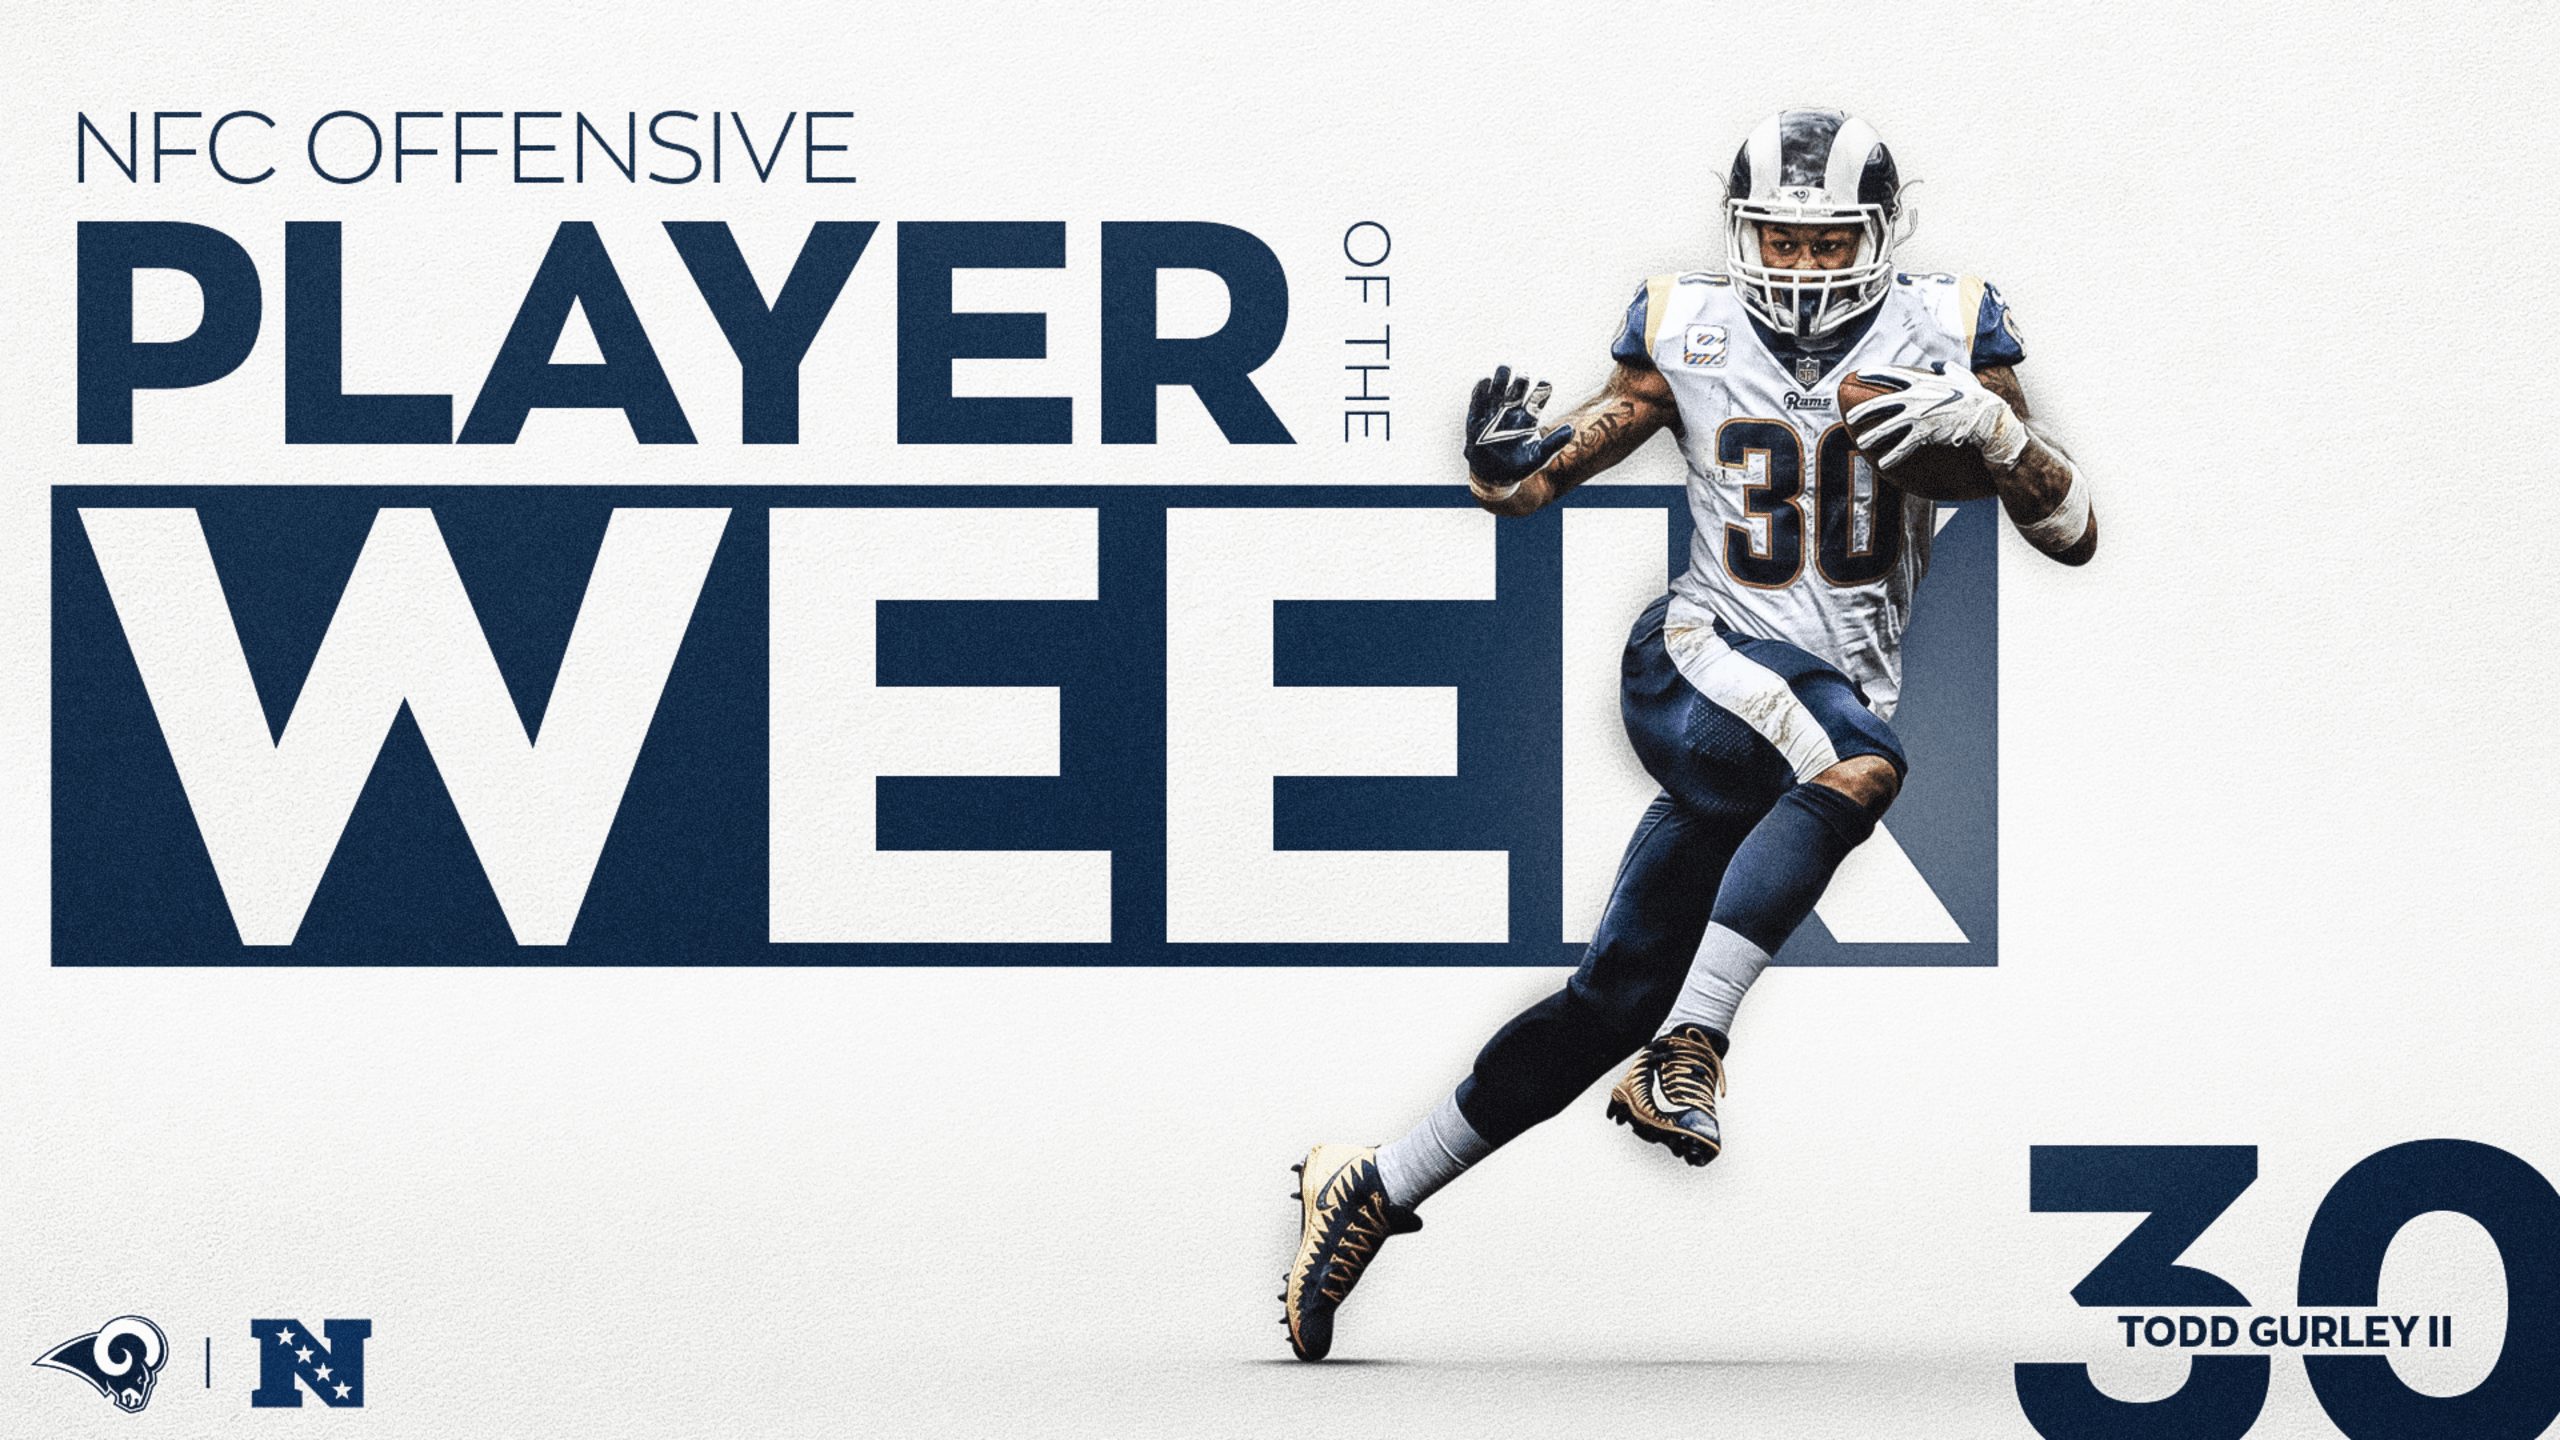 Todd Gurley player week poster